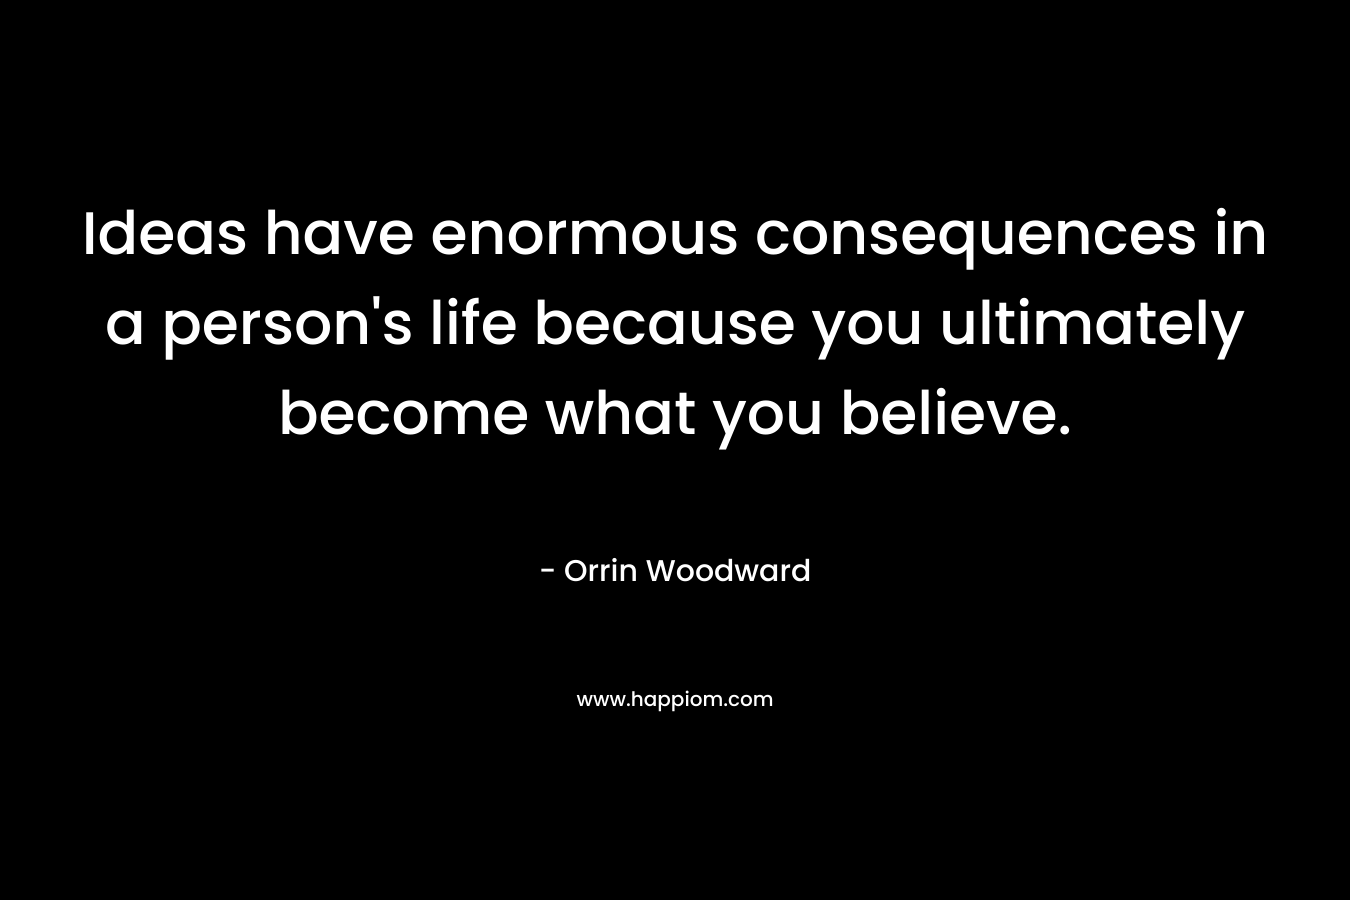 Ideas have enormous consequences in a person's life because you ultimately become what you believe.